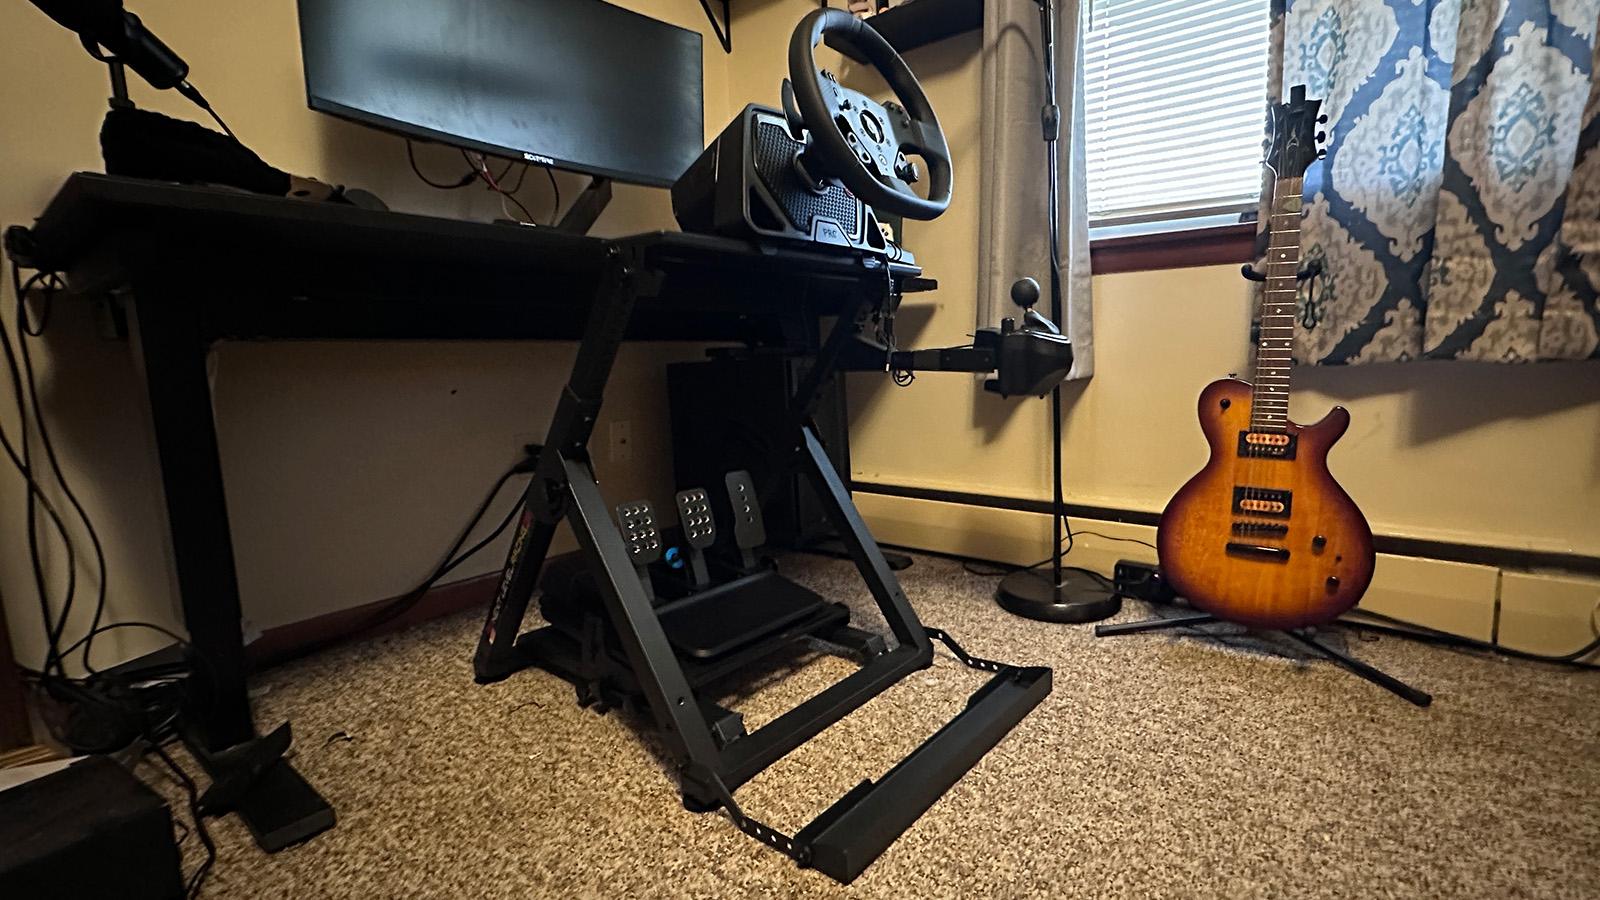 Next Level Racing Wheel Stand 2.0 review: Hefty but worth it - Dexerto